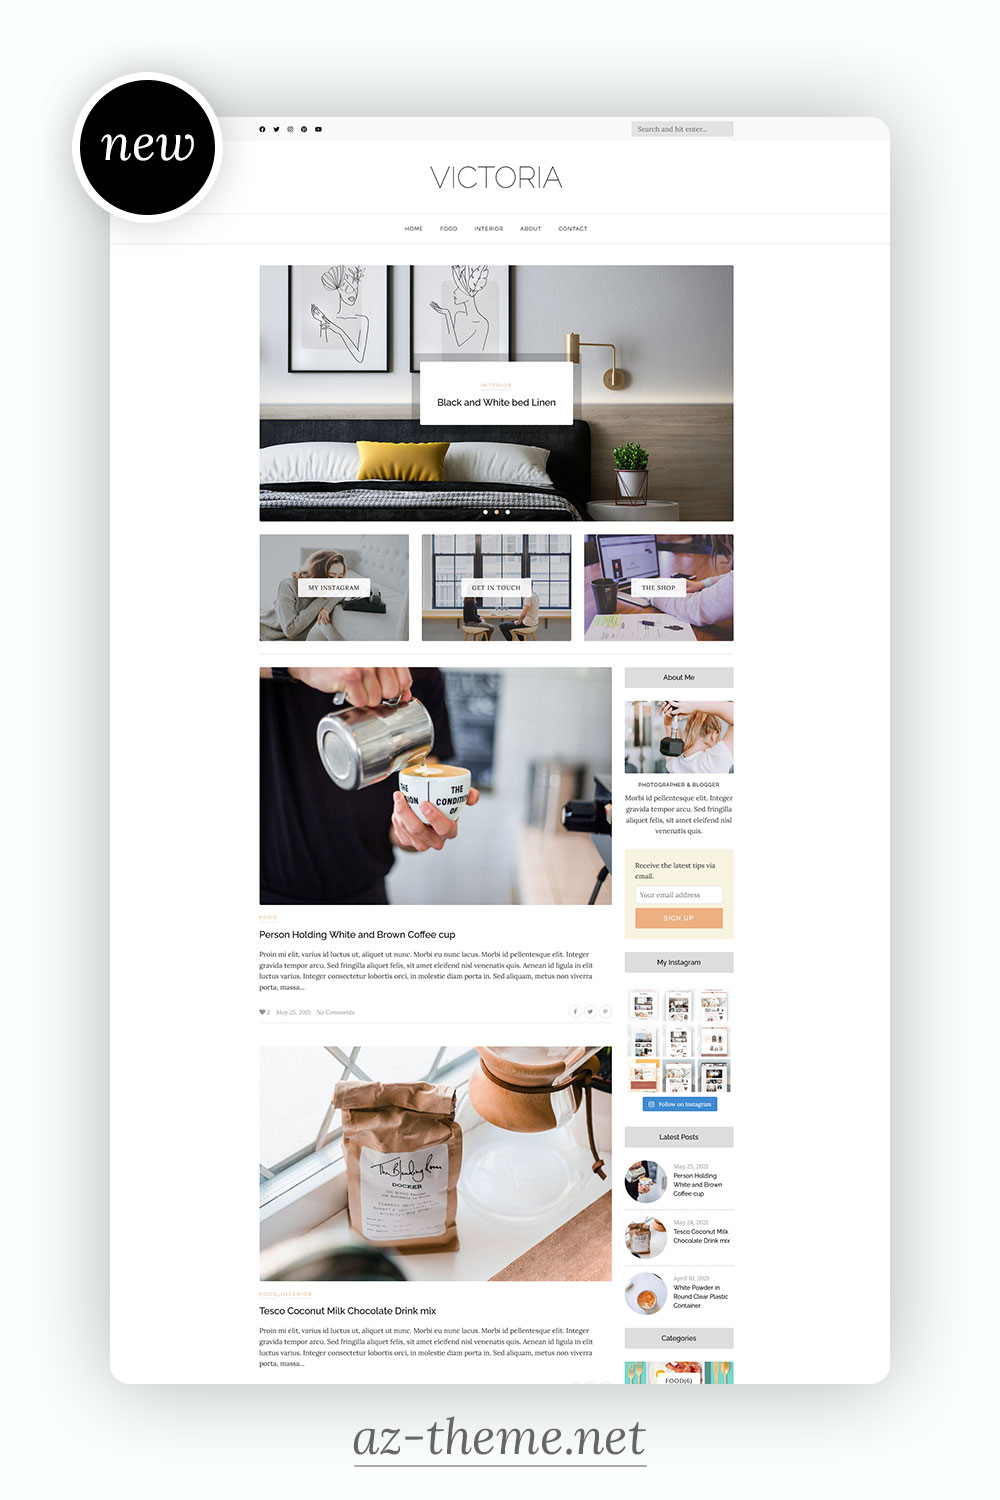 A WordPress Theme for Bloggers